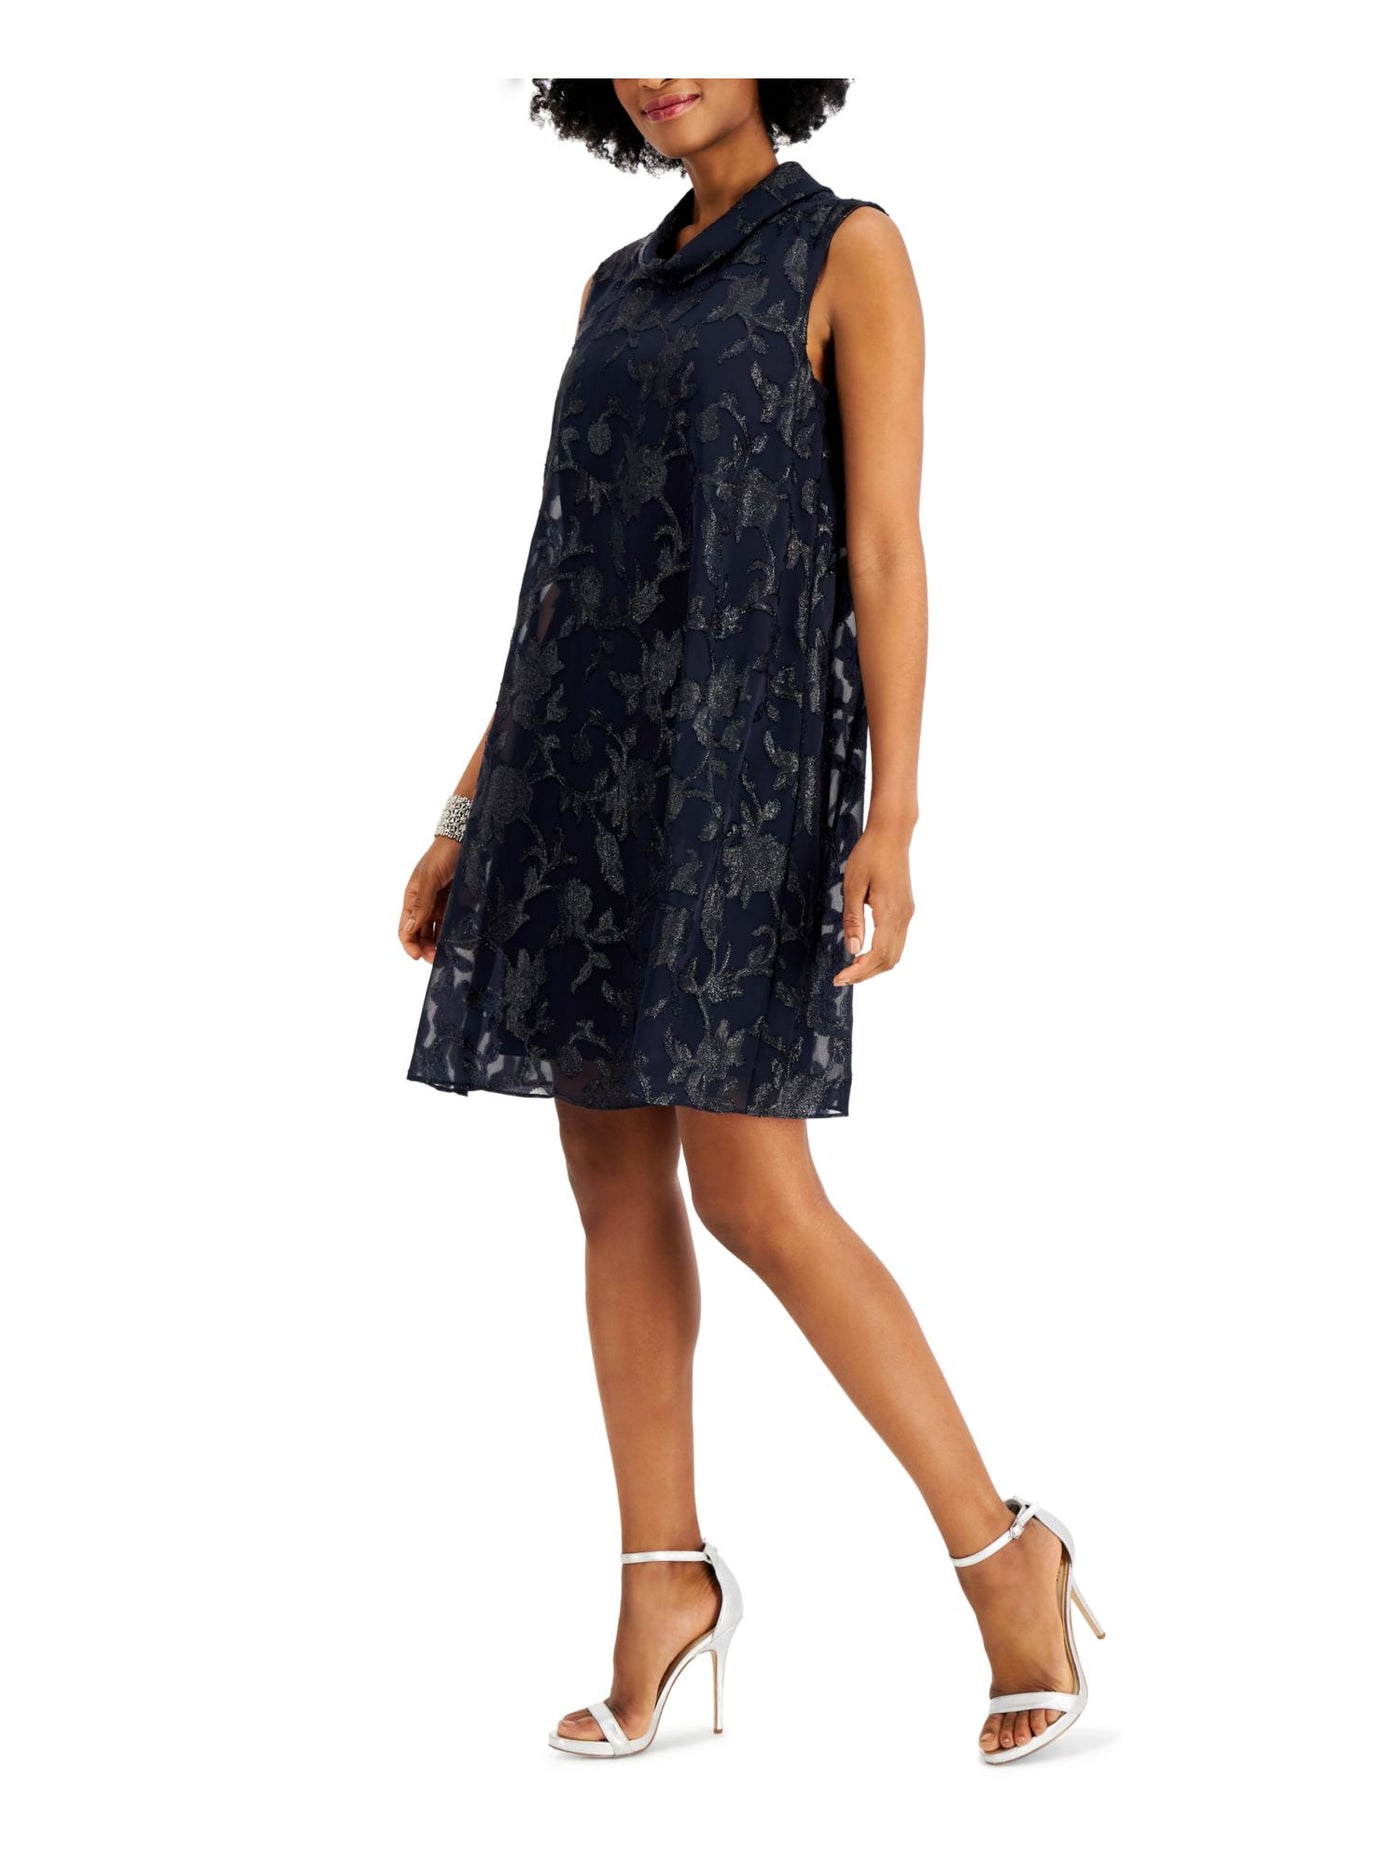 CONNECTED APPAREL Womens Sleeveless Above The Knee Cocktail Shift Dress